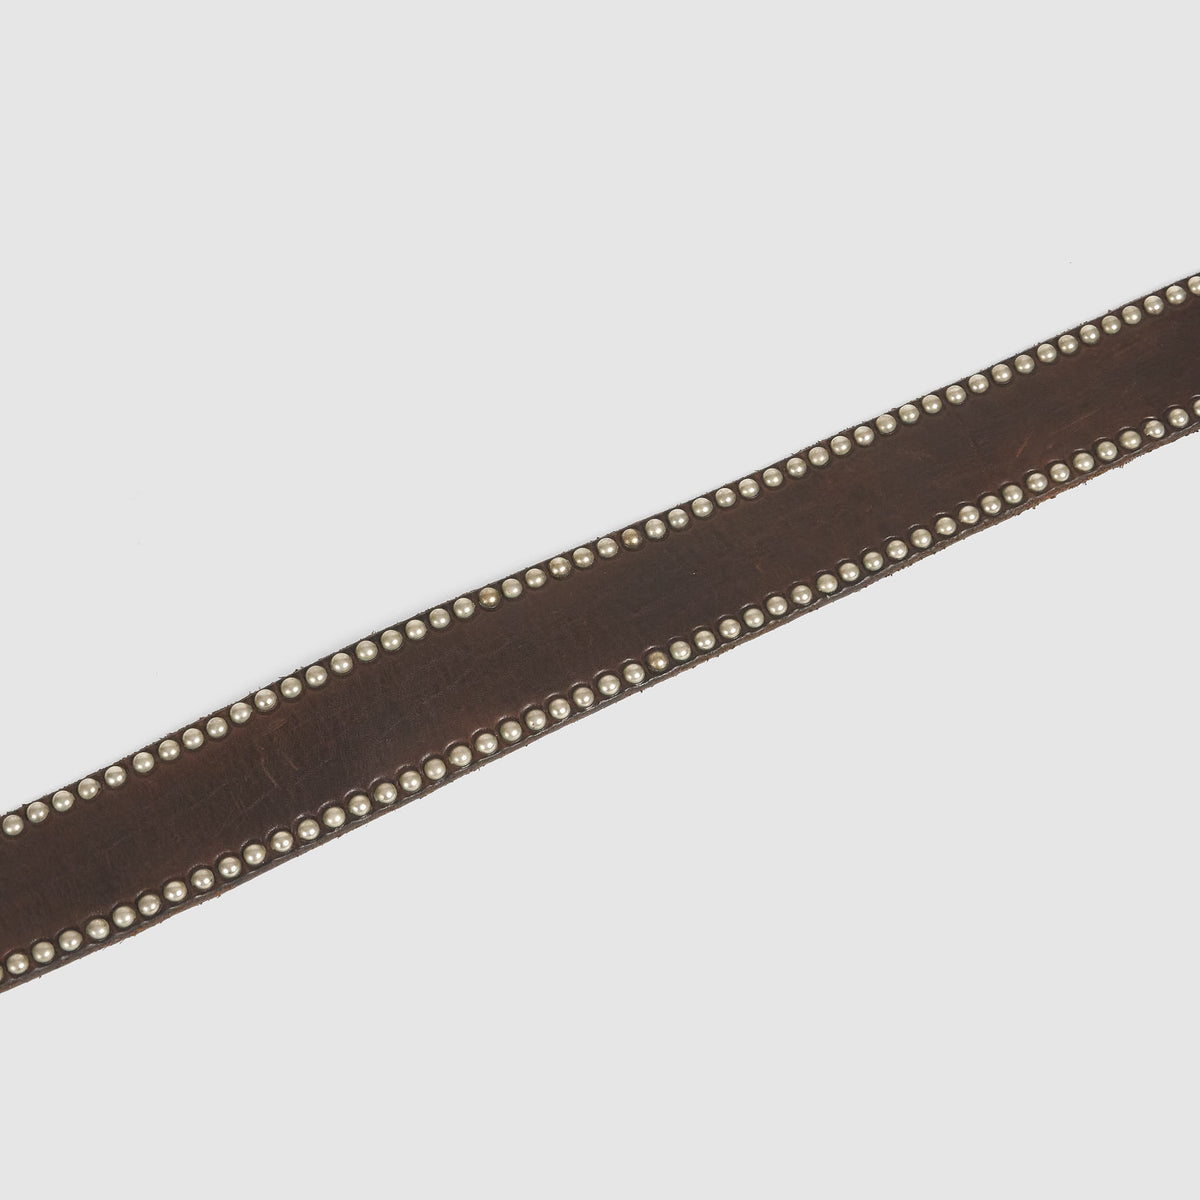 HTC Leather Ranch Belt with Studs